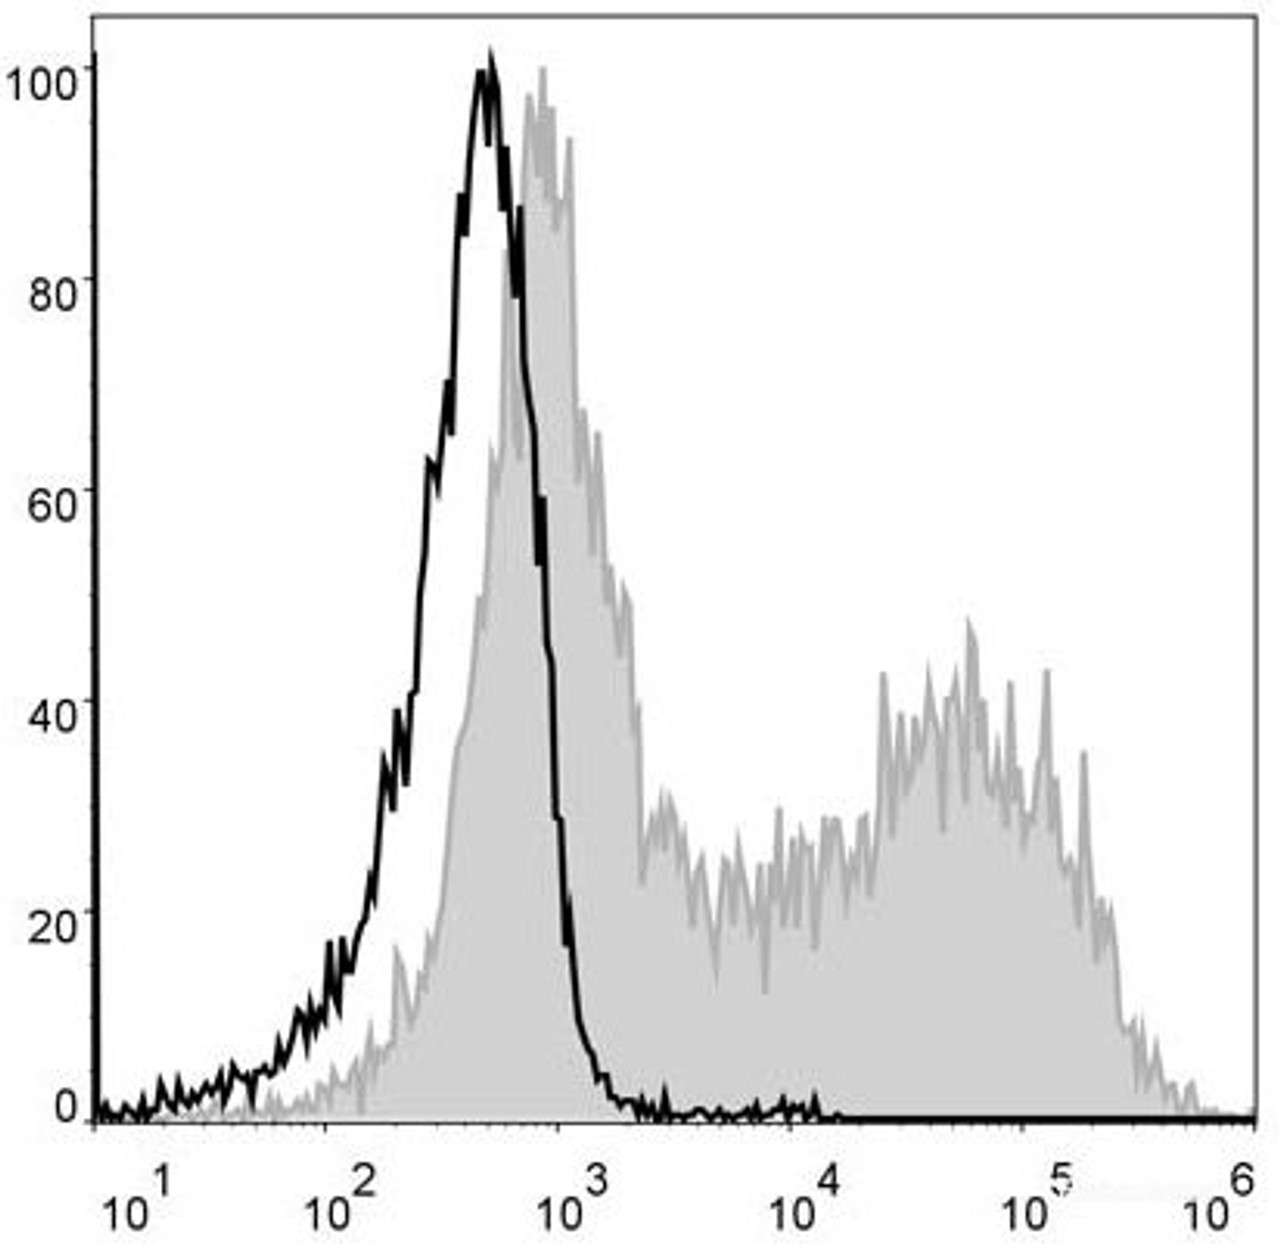 Mouse splenocytes are stained with PE Anti-Mouse MHC II (I-A/I-E) Antibody[Used at .2 μg/1<sup>6</sup> cells dilution](filled gray histogram). Unstained splenocytes (blank black histogram) are used as control.